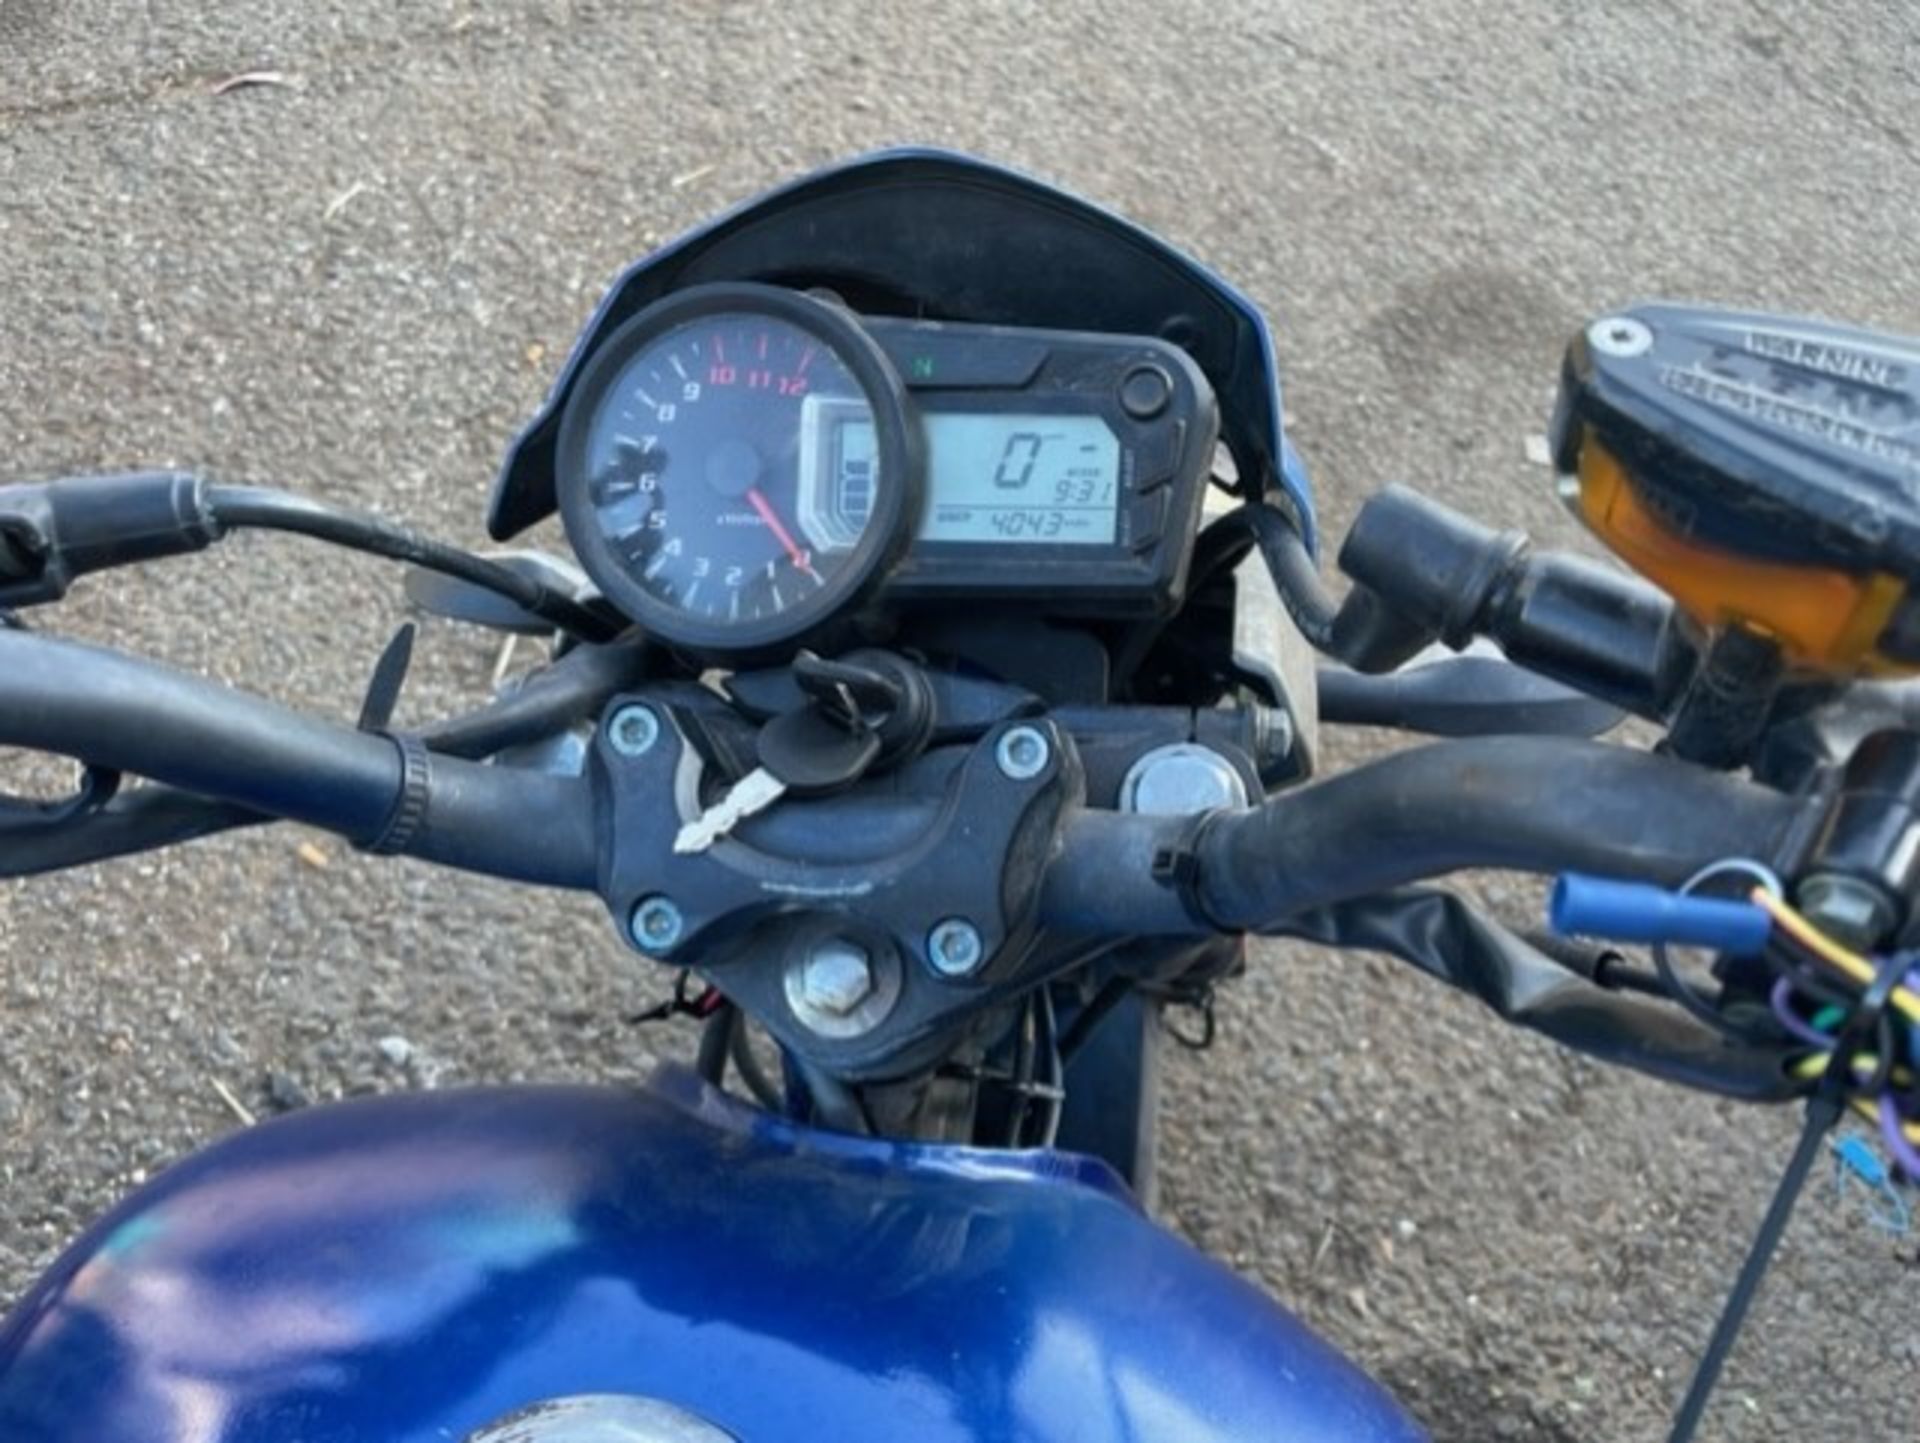 Zonnis 125 motorbike 4027 miles on the clock , MOT'D untill 25/05/24 - Image 8 of 9